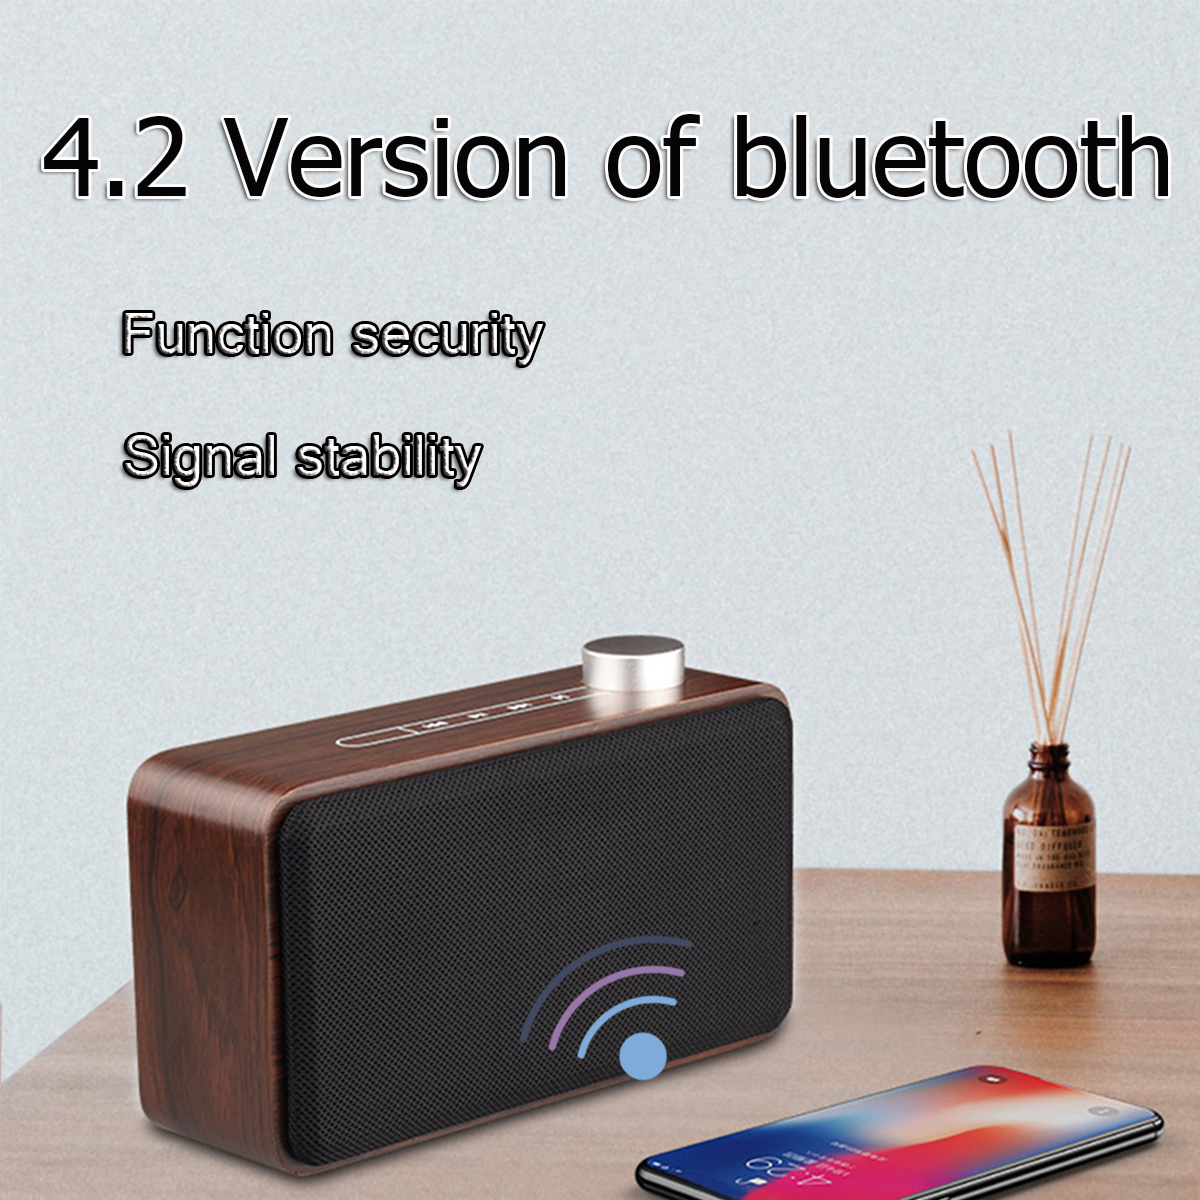 W5A-Wooden-Wireless-bluetooth-Speaker-Portable-Stereo-TF-Card-U-Disk-35mm-Audio-Speaker-with-Mic-1526315-3